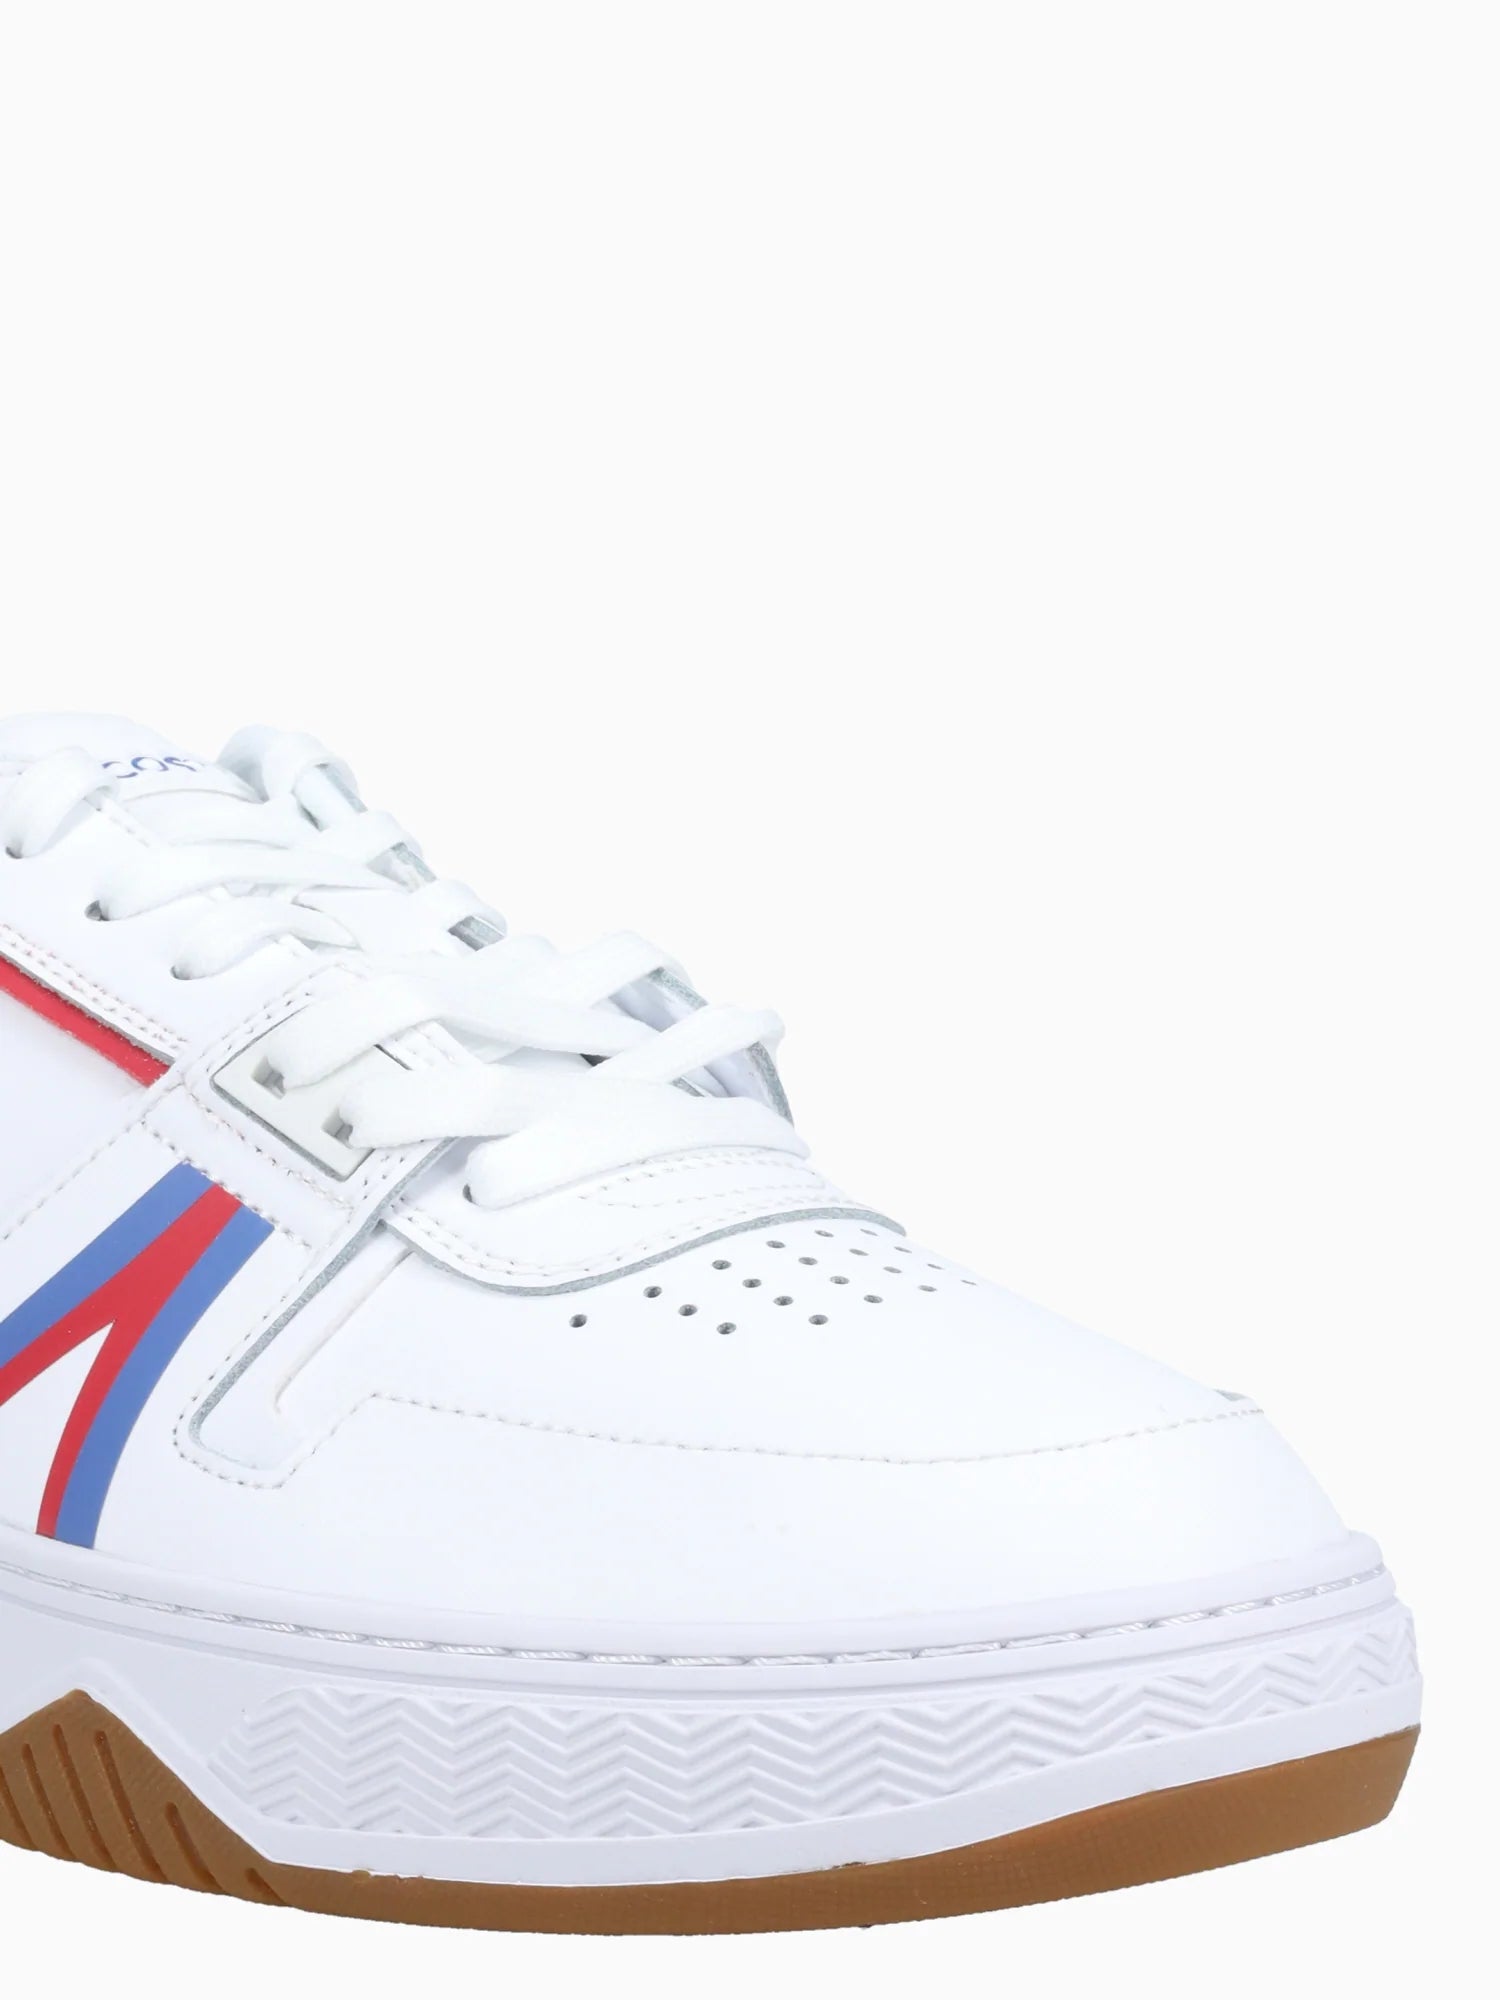 L001 Contrasted Leather Sneakers white/red/blue